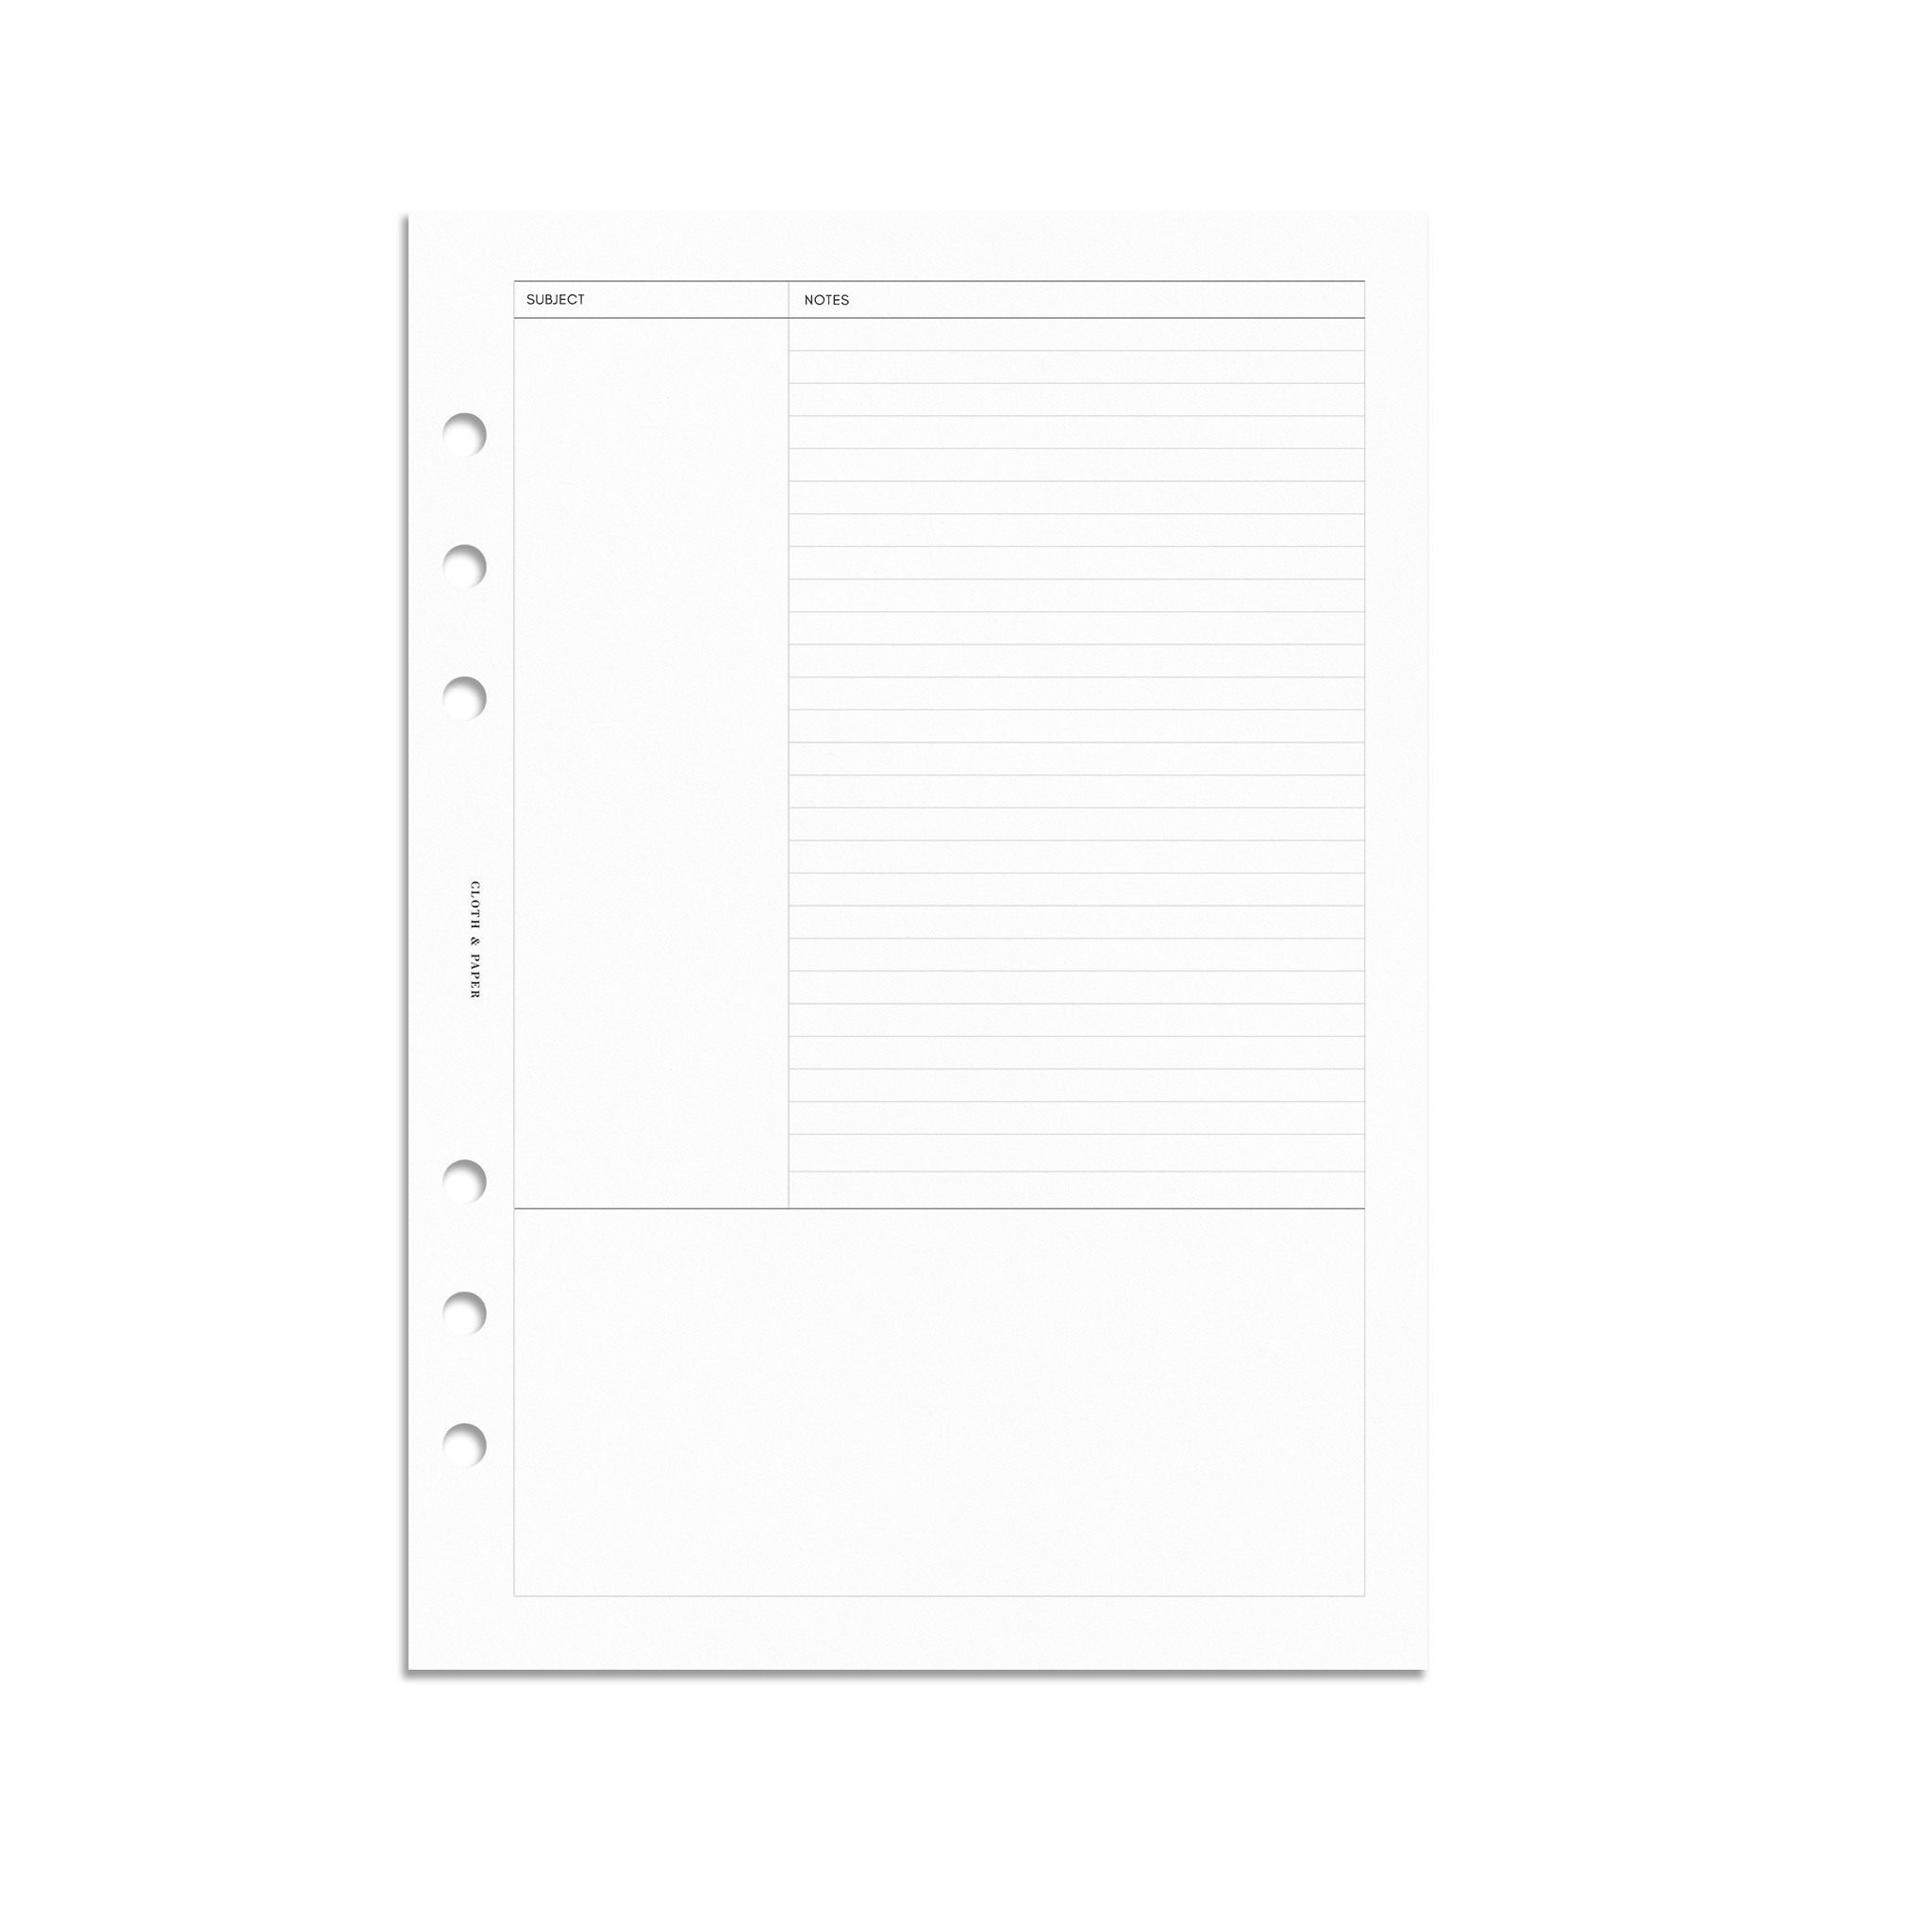 A4 Plain White Discbound Planner Paper A4 Plain Paper Refill Pack for A4  Mind Map Planner 